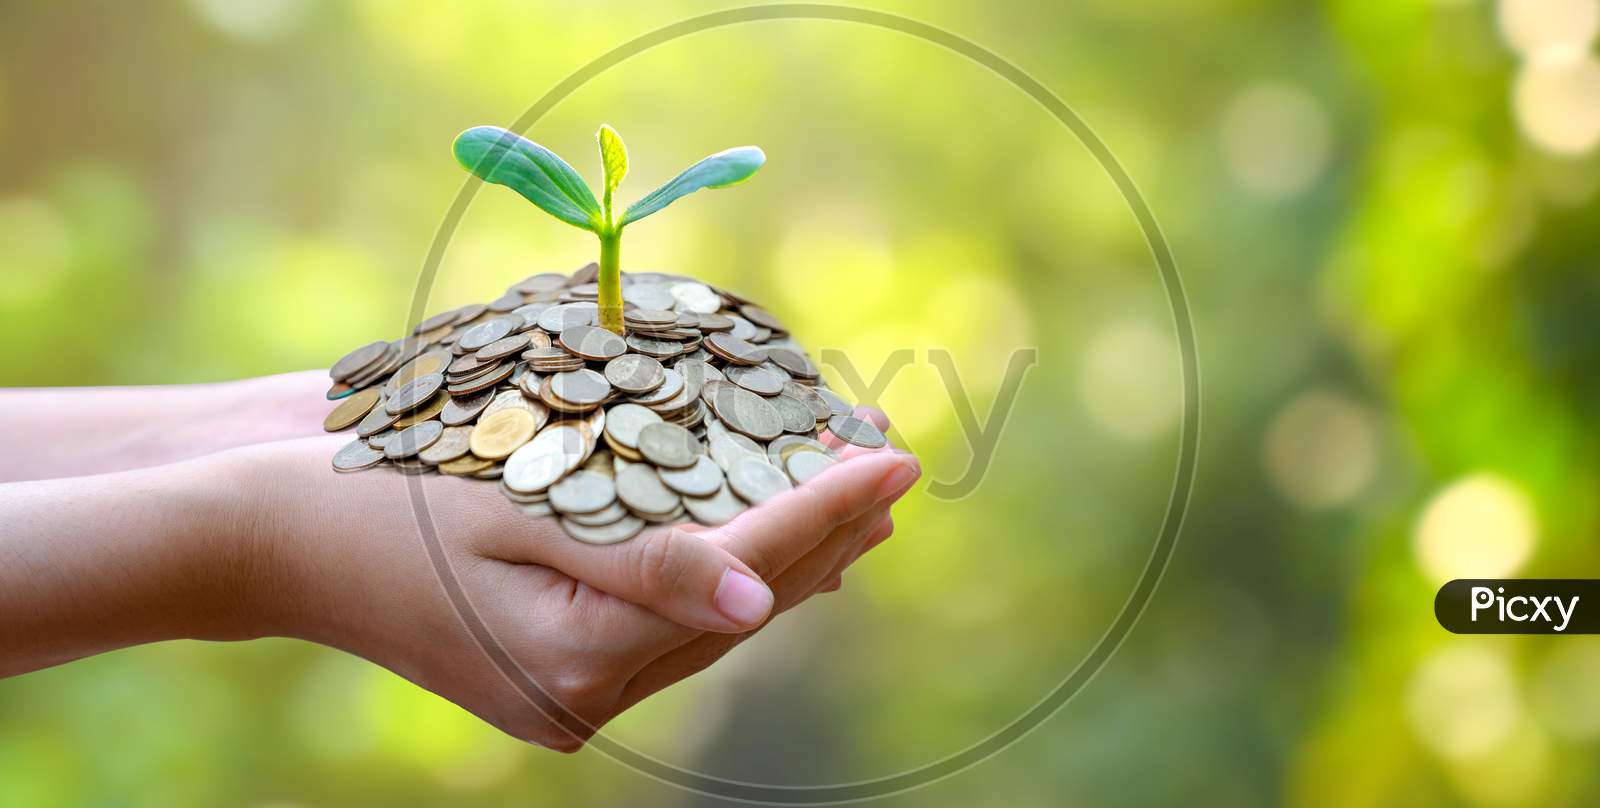 Hand Coin Tree The Tree Grows On The Pile. Saving Money For The Future. Investment Ideas And Business Growth. Green Background With Bokeh Sun